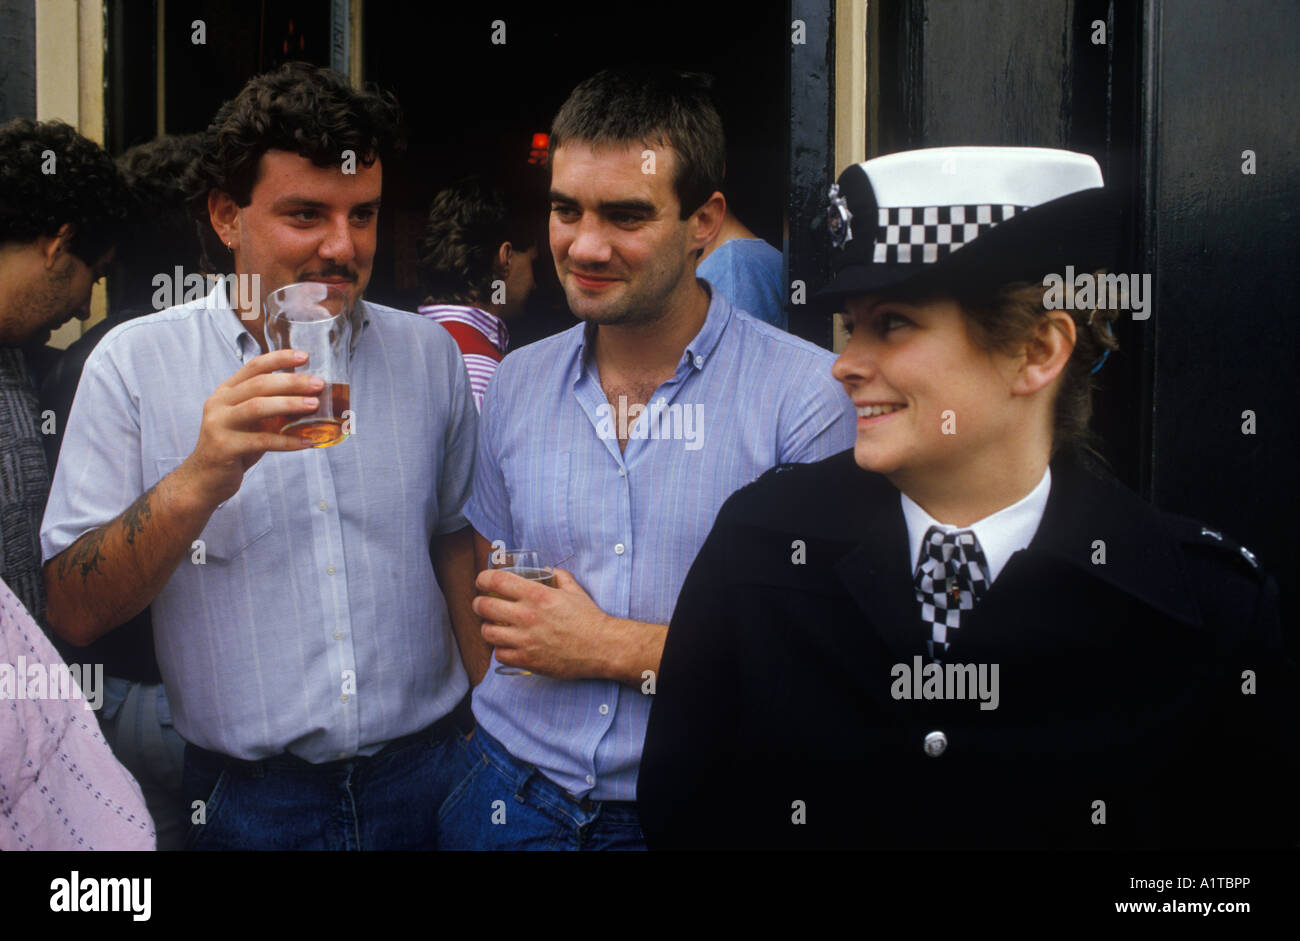 1980s Chelsea football club fans having a pint before the game flirting with an attractive female police woman on crowd control duty London UK 1985 Stock Photo